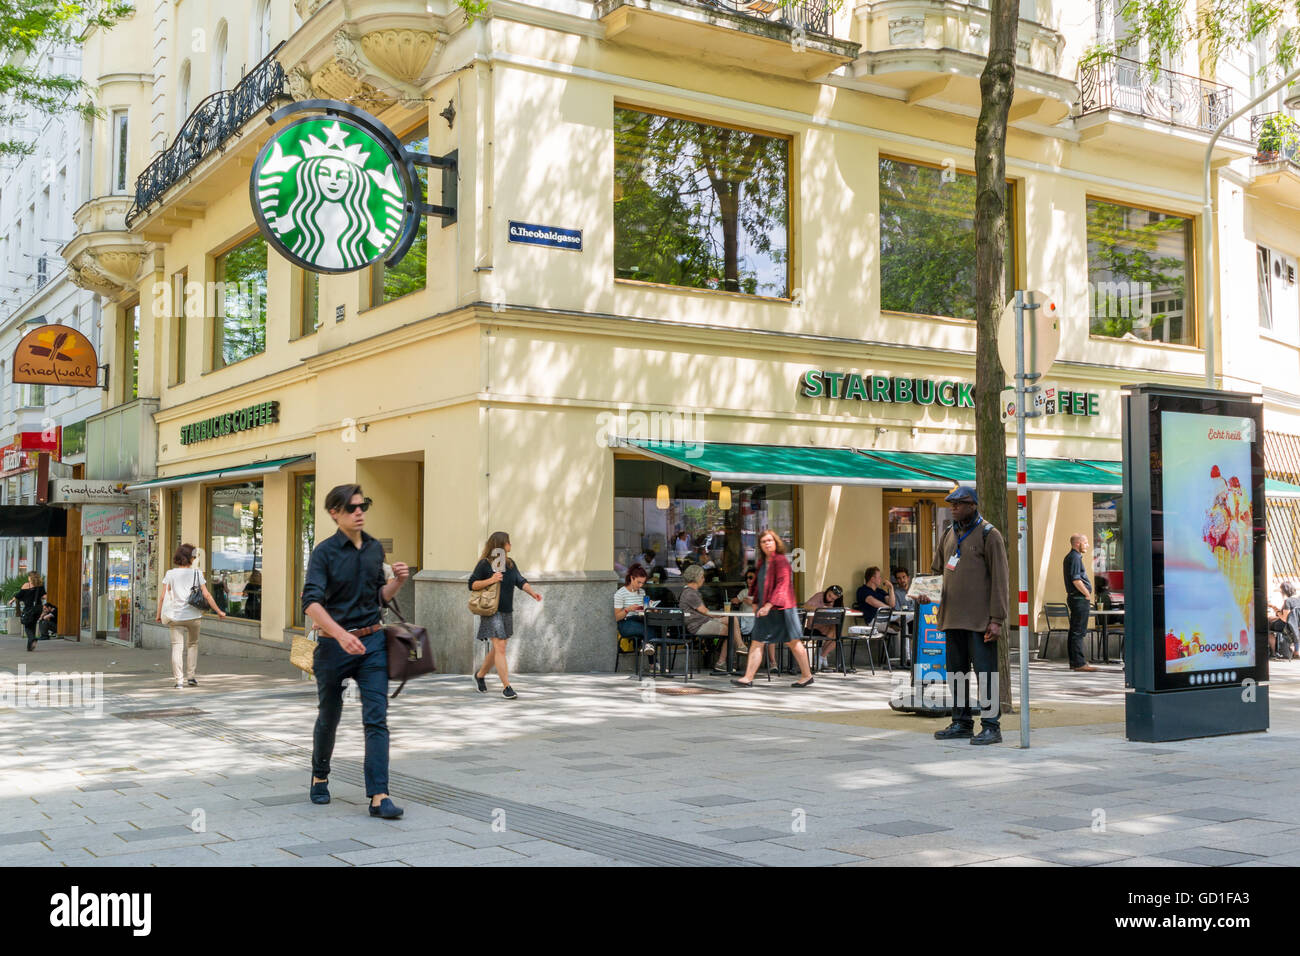 People and Starbucks cafe in shopping street Mariahilfer Strasse in Vienna, Austria Stock Photo